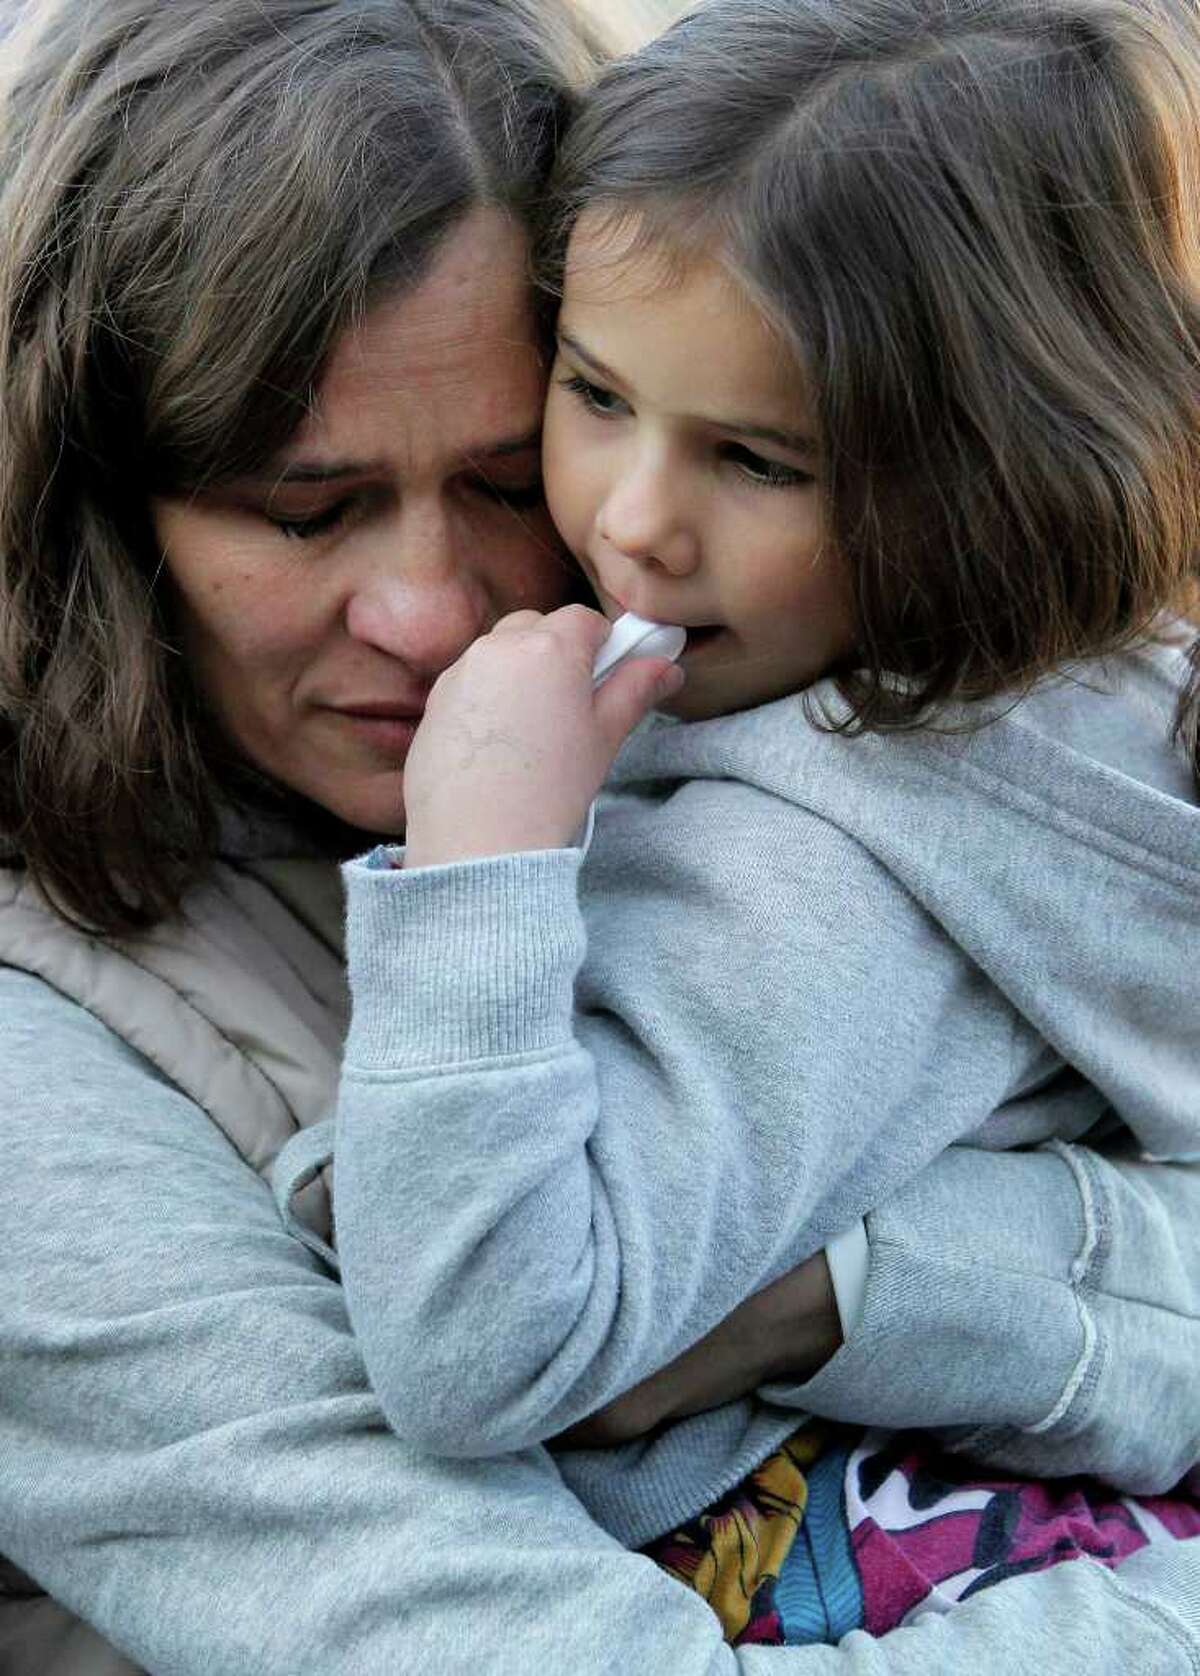 Ina Menzl, left, hugs her daughter, 4-year-old Rebecca Kraft, Sunday, Jan. 8, 2012, in Tucson, Ariz., outside the Safeway grocery store where U.S. Rep. Gabrielle Giffords, D-Ariz., was shot one year ago during a shooting spree that left 6 dead and 13 wounded, including Giffords. (AP Photo/Matt York)